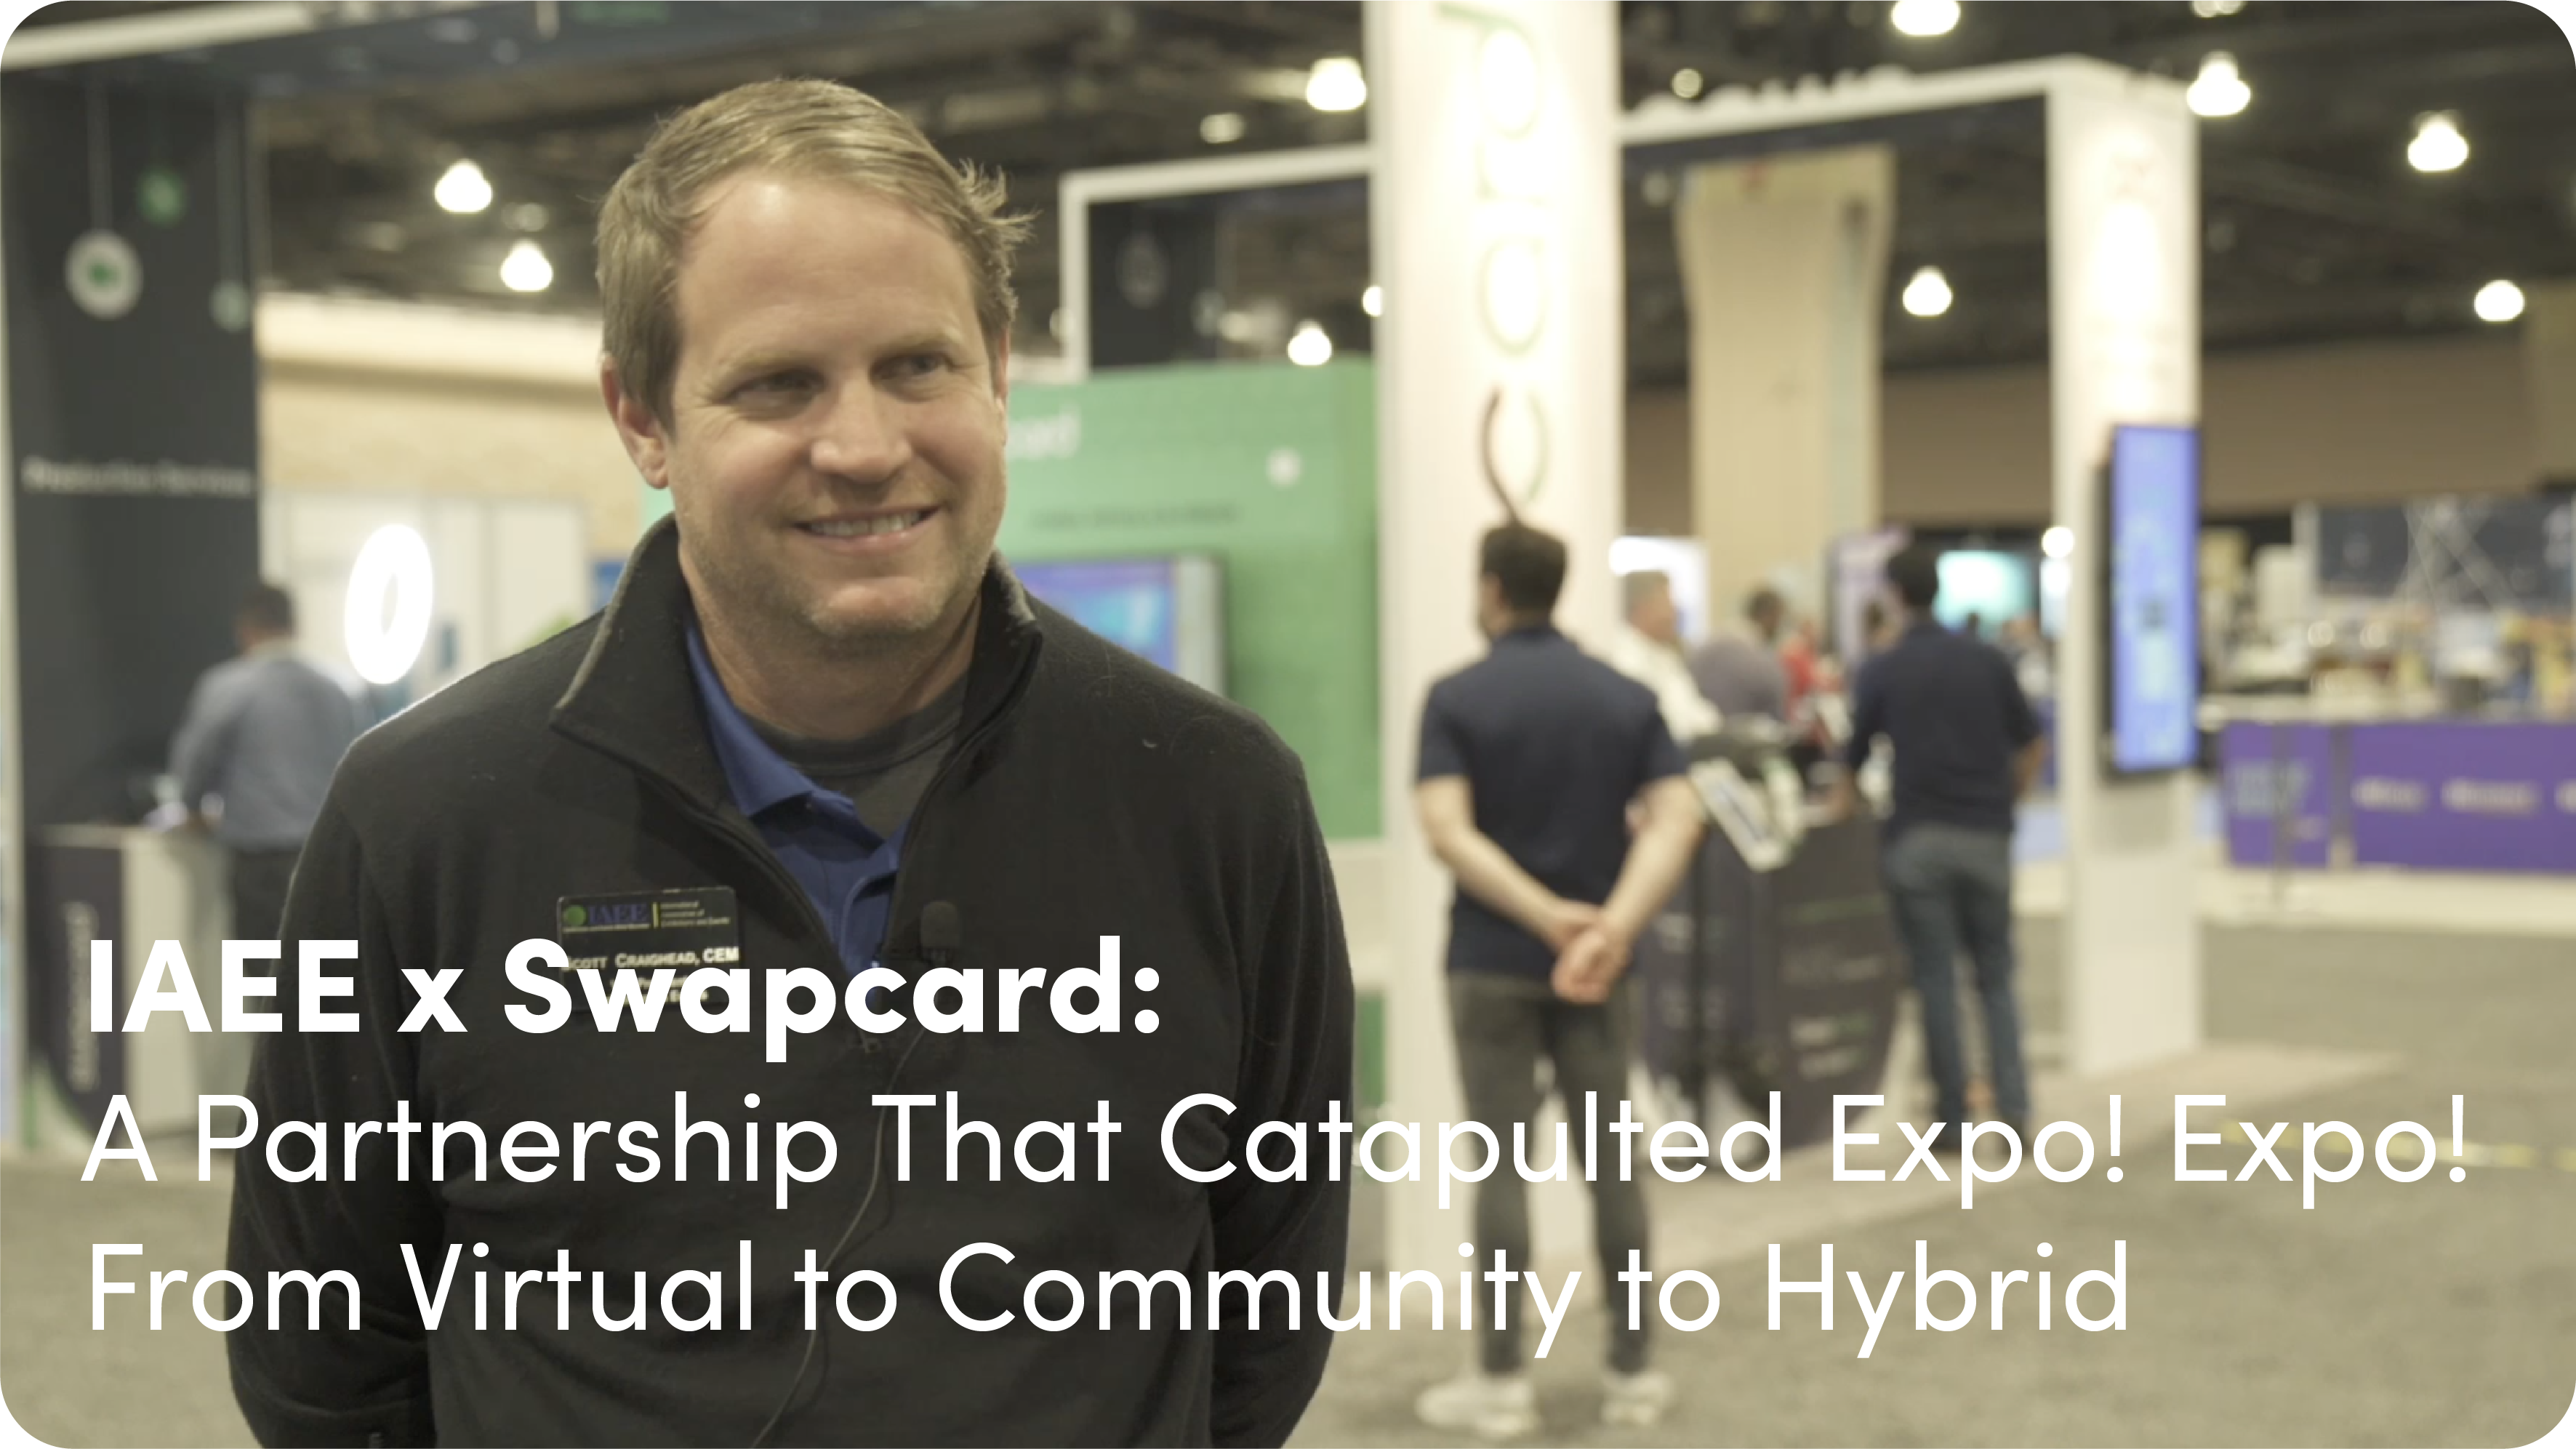 IAEE x Swapcard: A Partnership That Catapulted Expo! Expo! From Virtual to Community to Hybrid